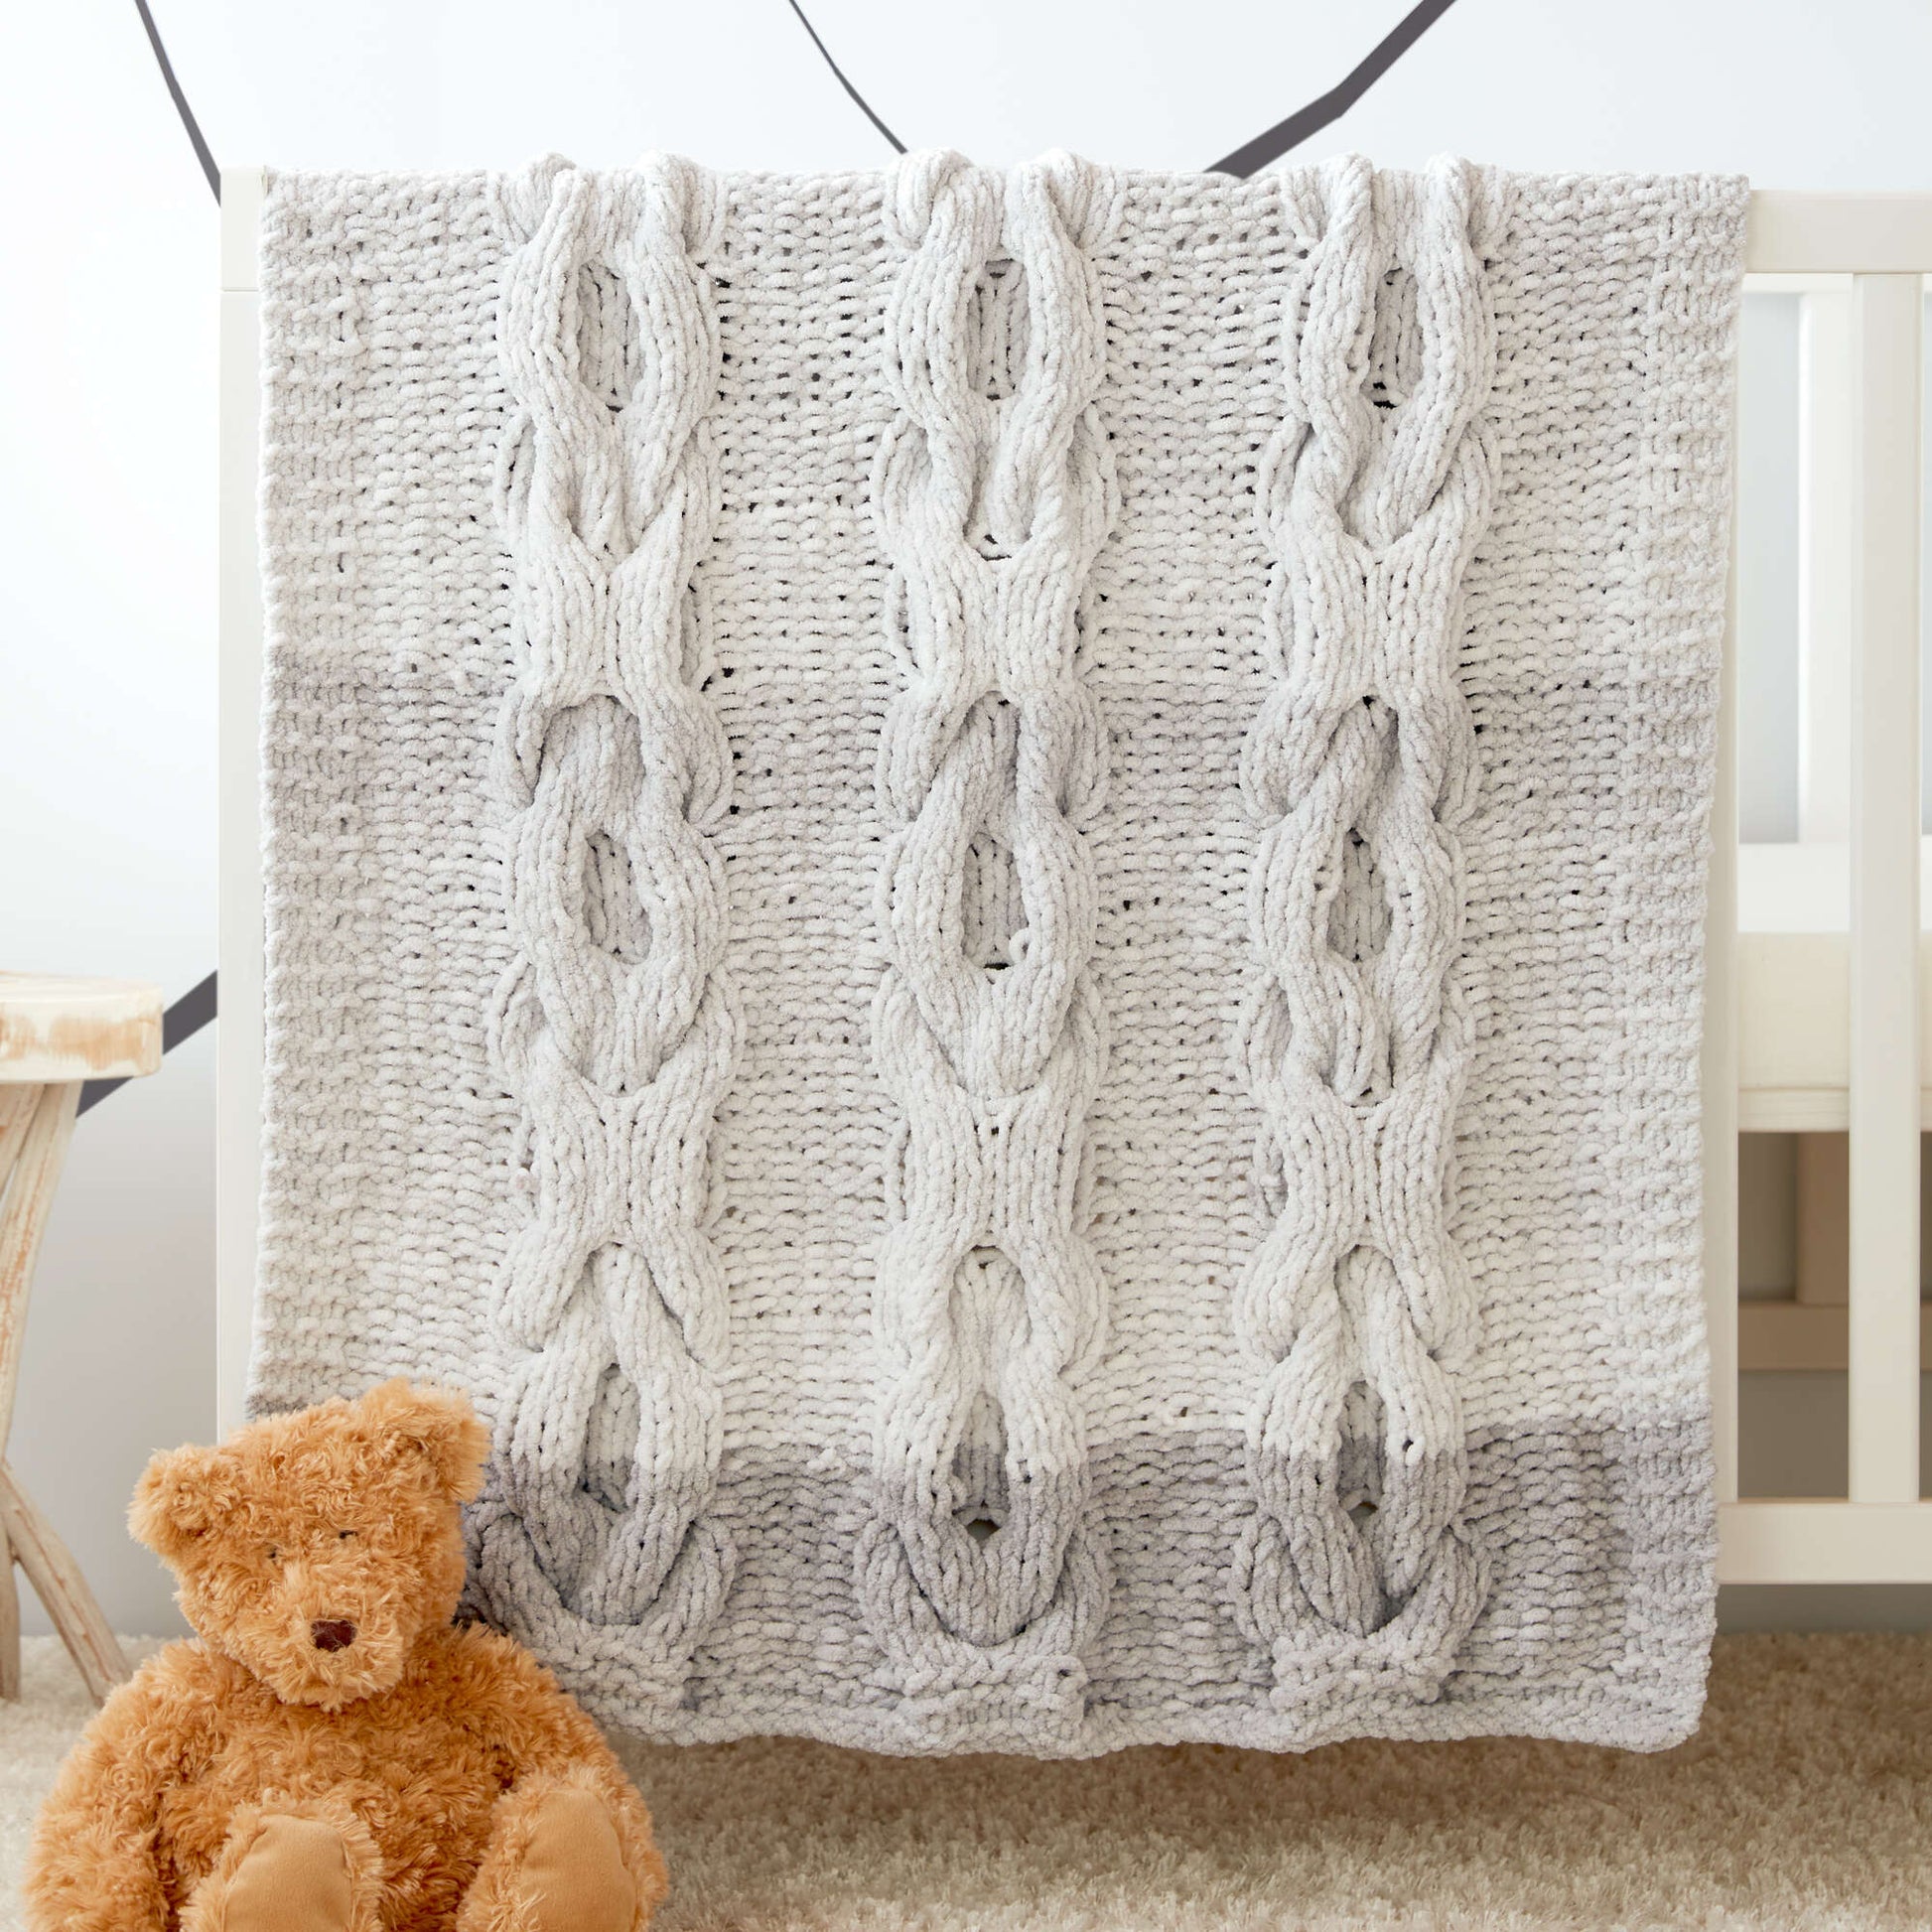 Free Bernat Hugs And Kisses Cable Knit Baby Blanket Pattern